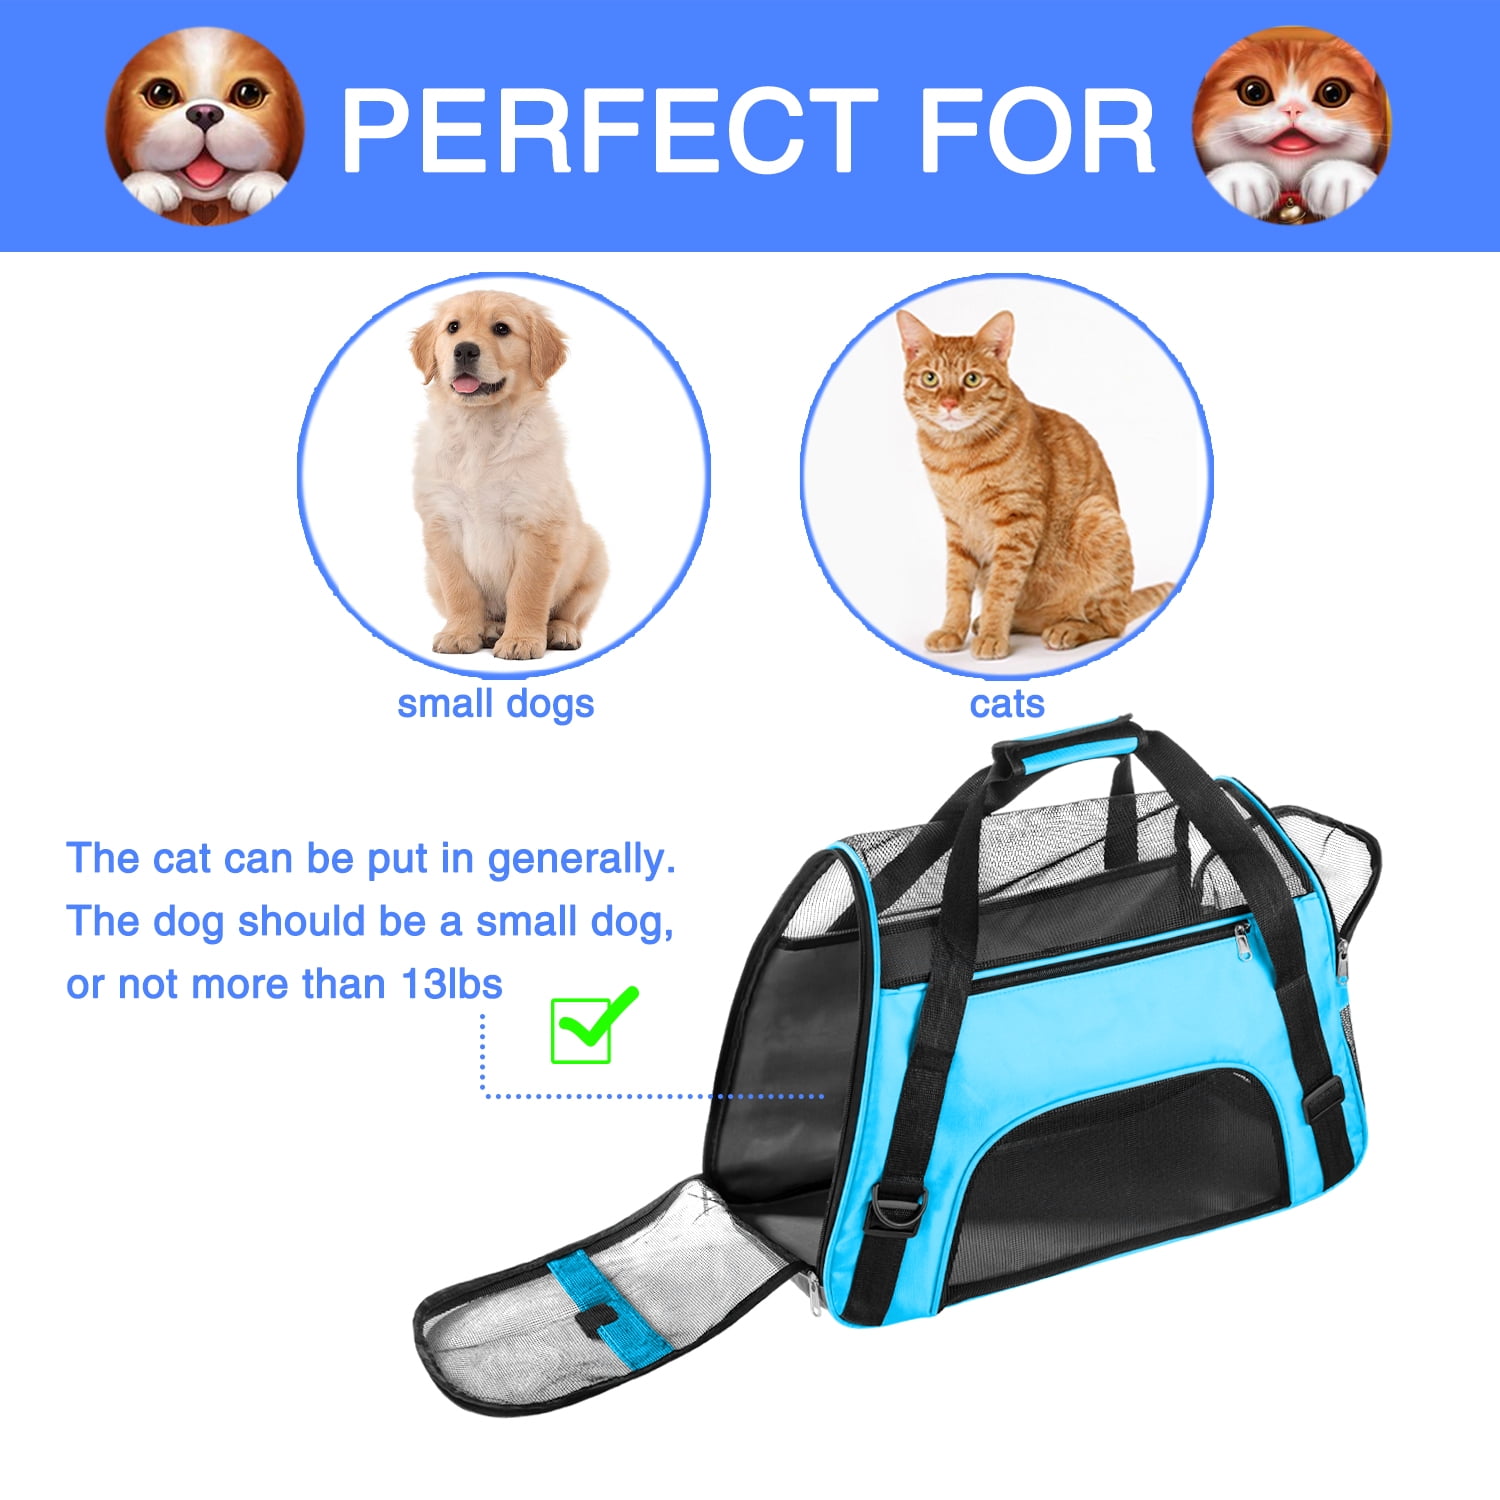 A4Pet Small Dog Carrier for Air Travel, Airline Approved Cat Carrier for  Under 18 lbs Small Pet, Soft-Sided Pet Travel Carrier Bag - Gray, 16.9 x  10.2